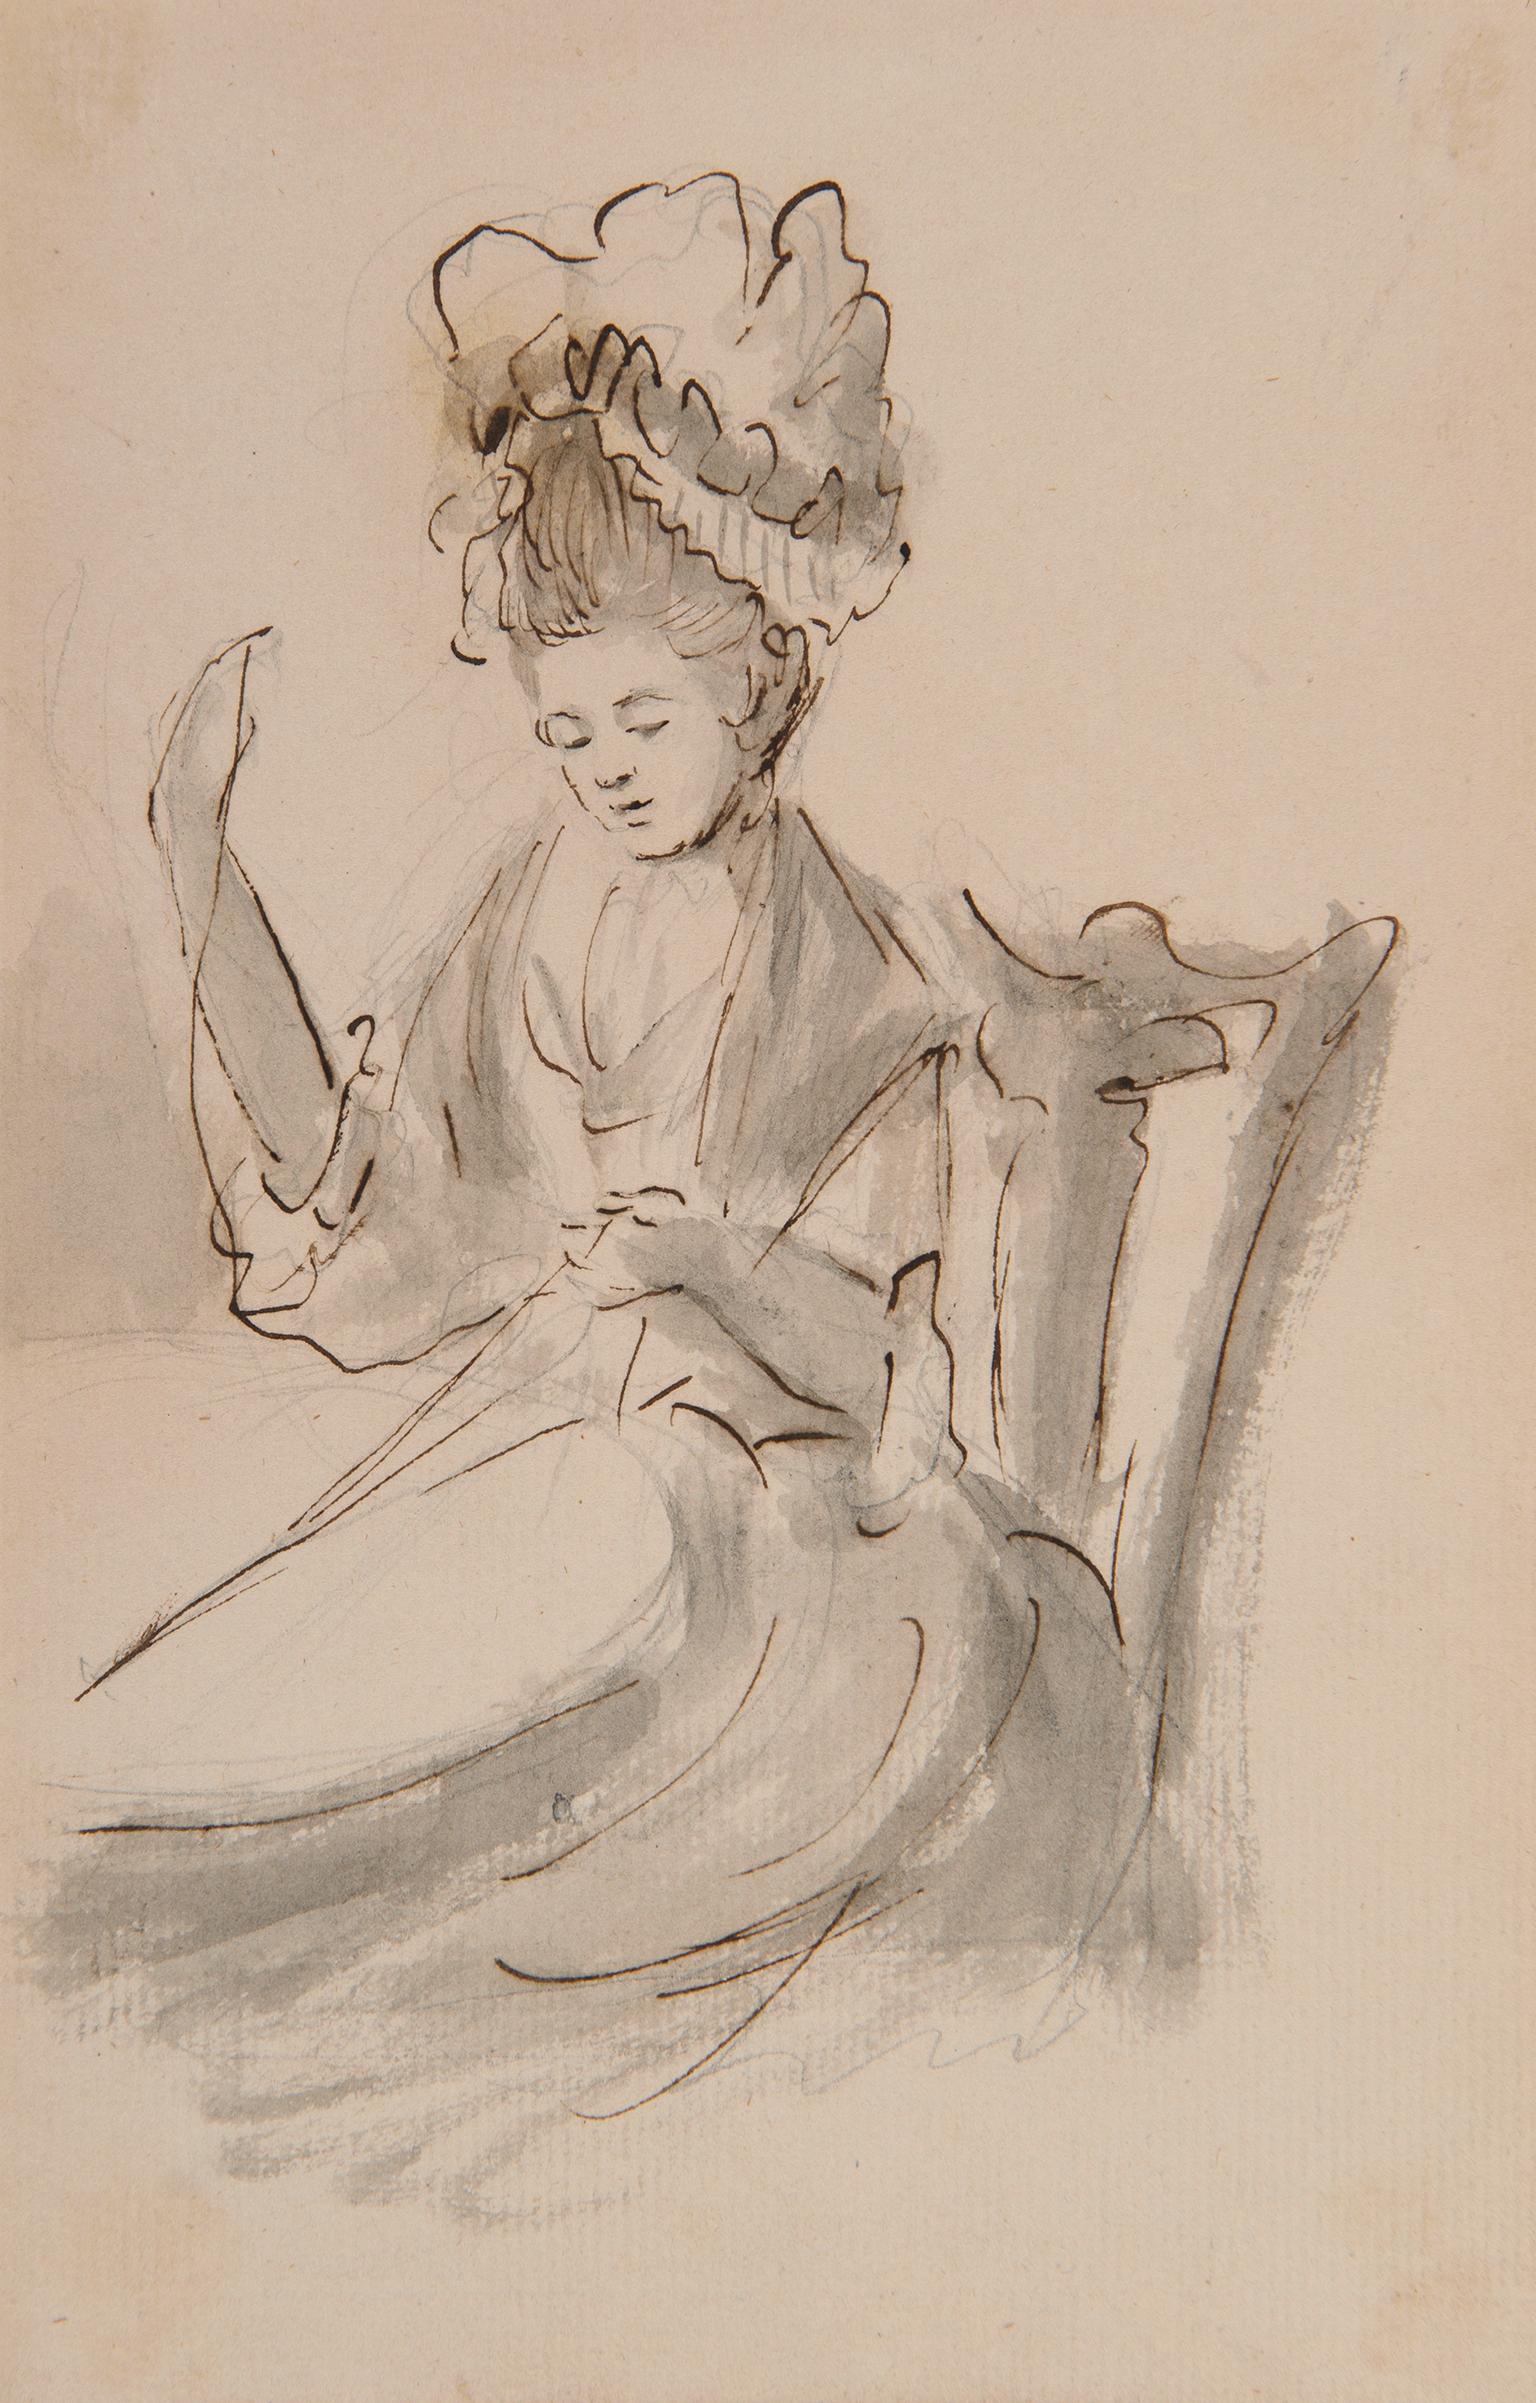 Unknown Figurative Art – A lady wearing a mob cap sewing - 18th century figurative ink drawing